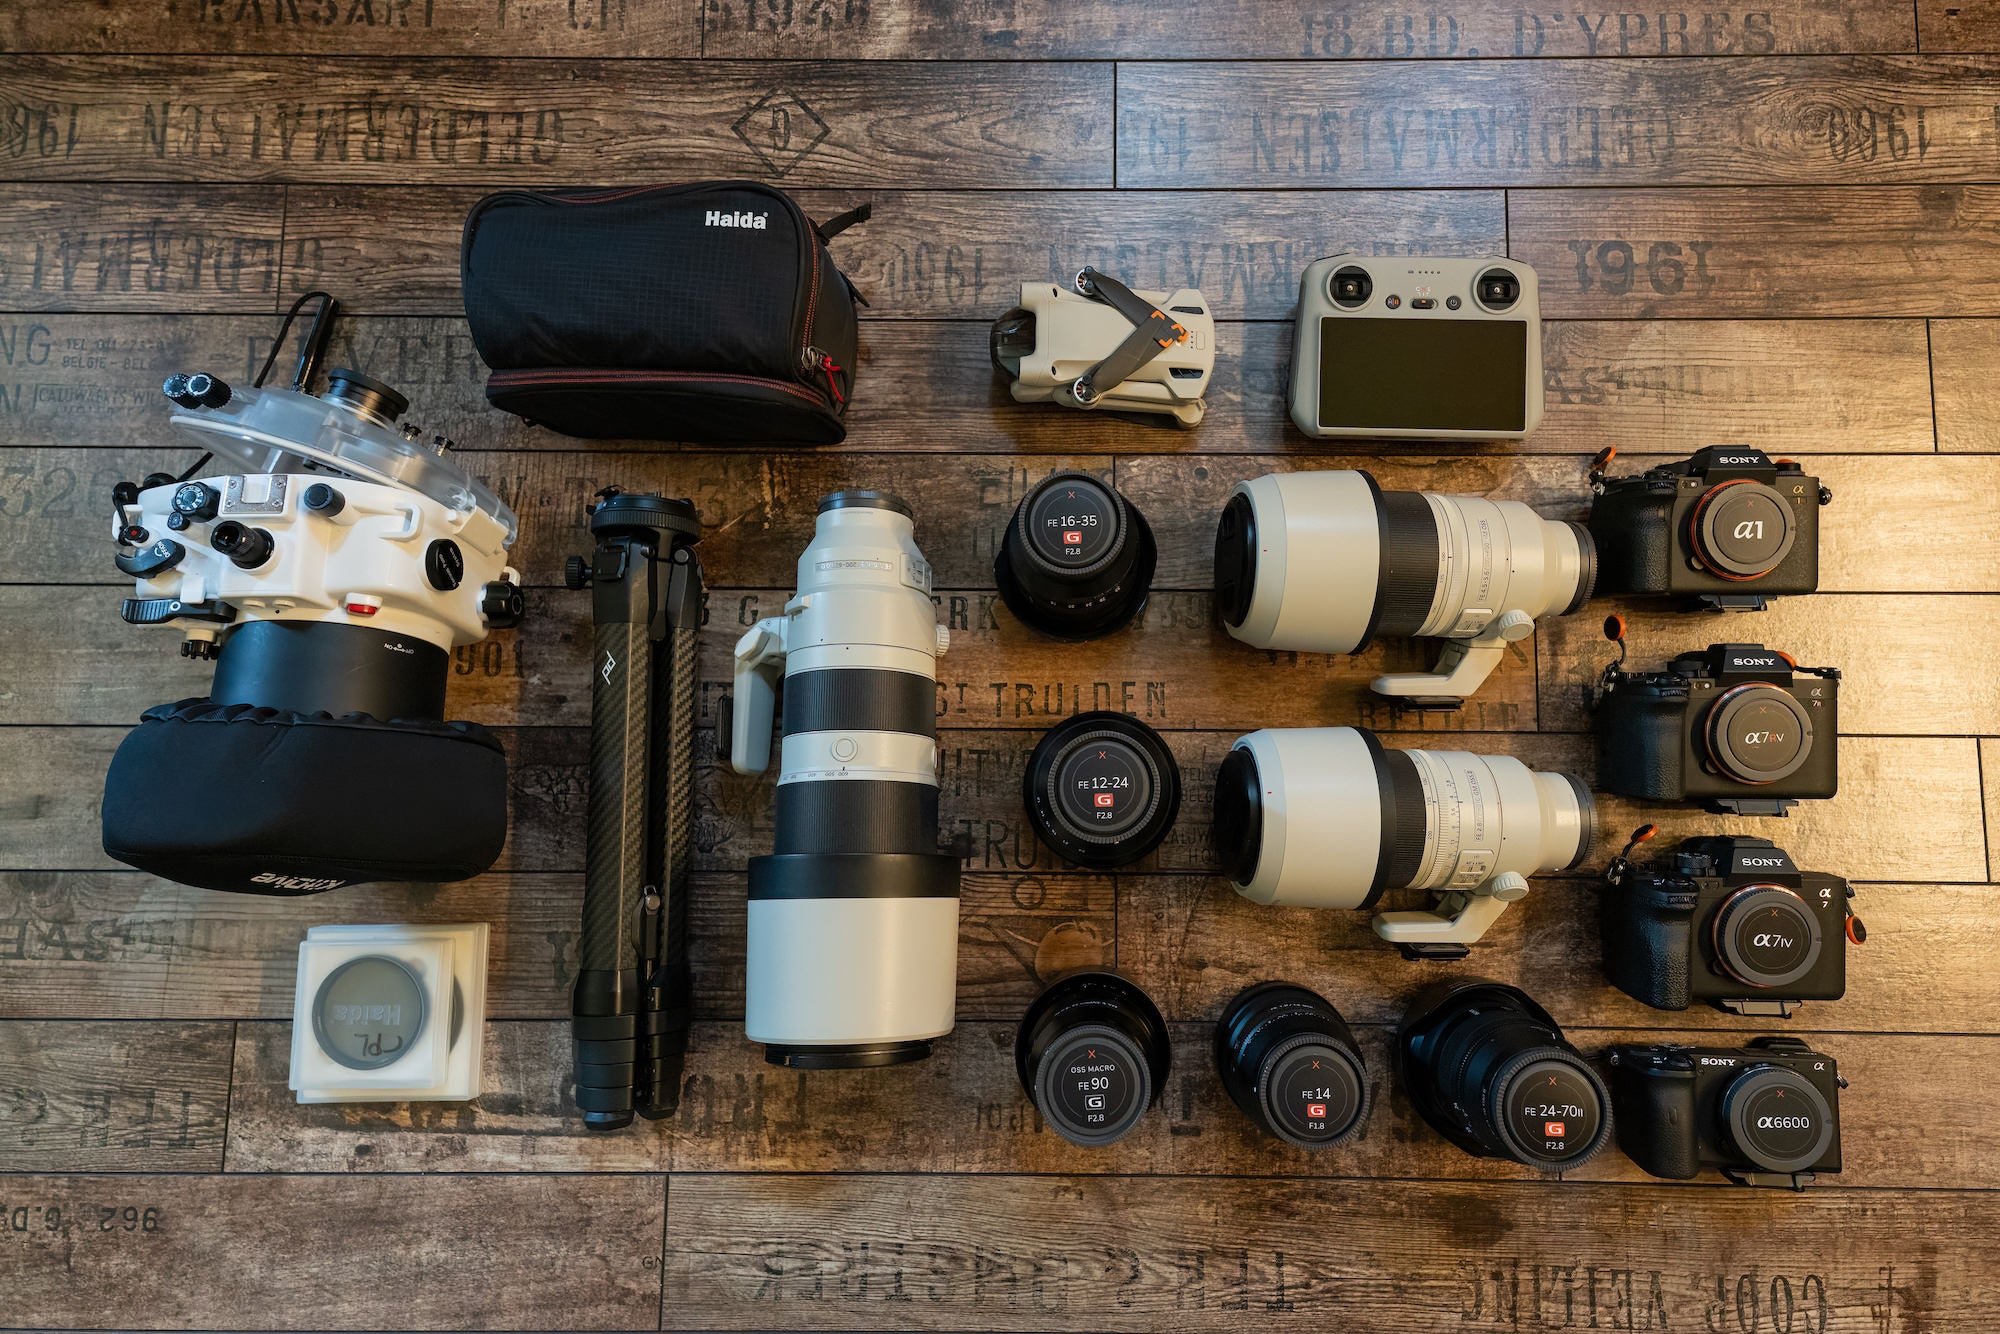 Journey Glimpse Photography Collective's kit